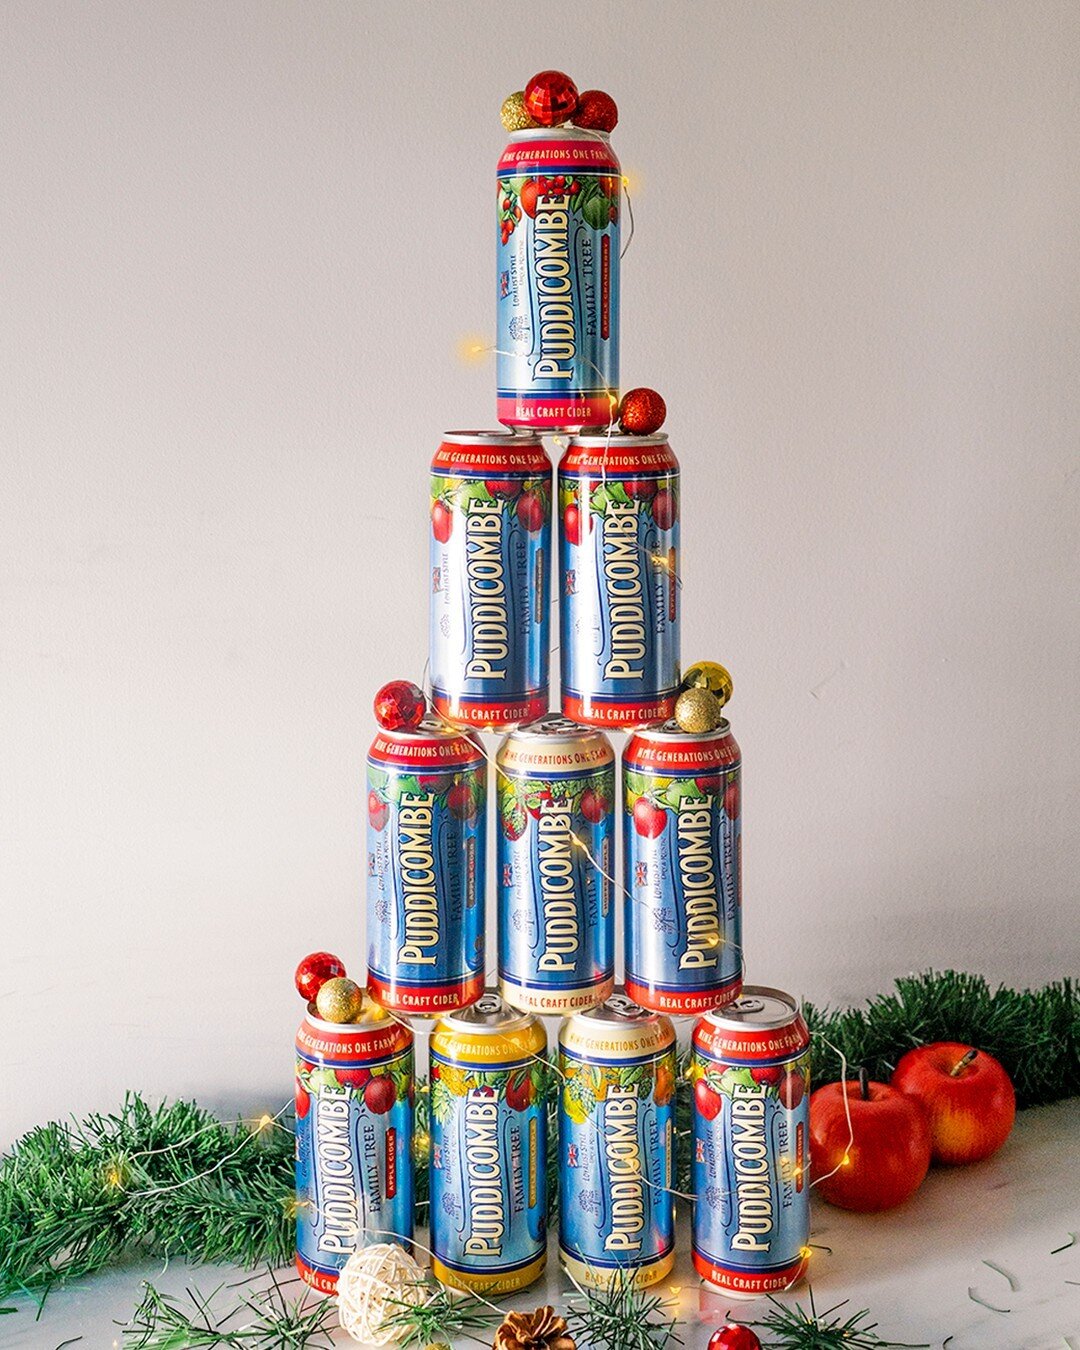 Our kind of tree.🎄🍎

You can shop our entire lineup online #LinkInBio!